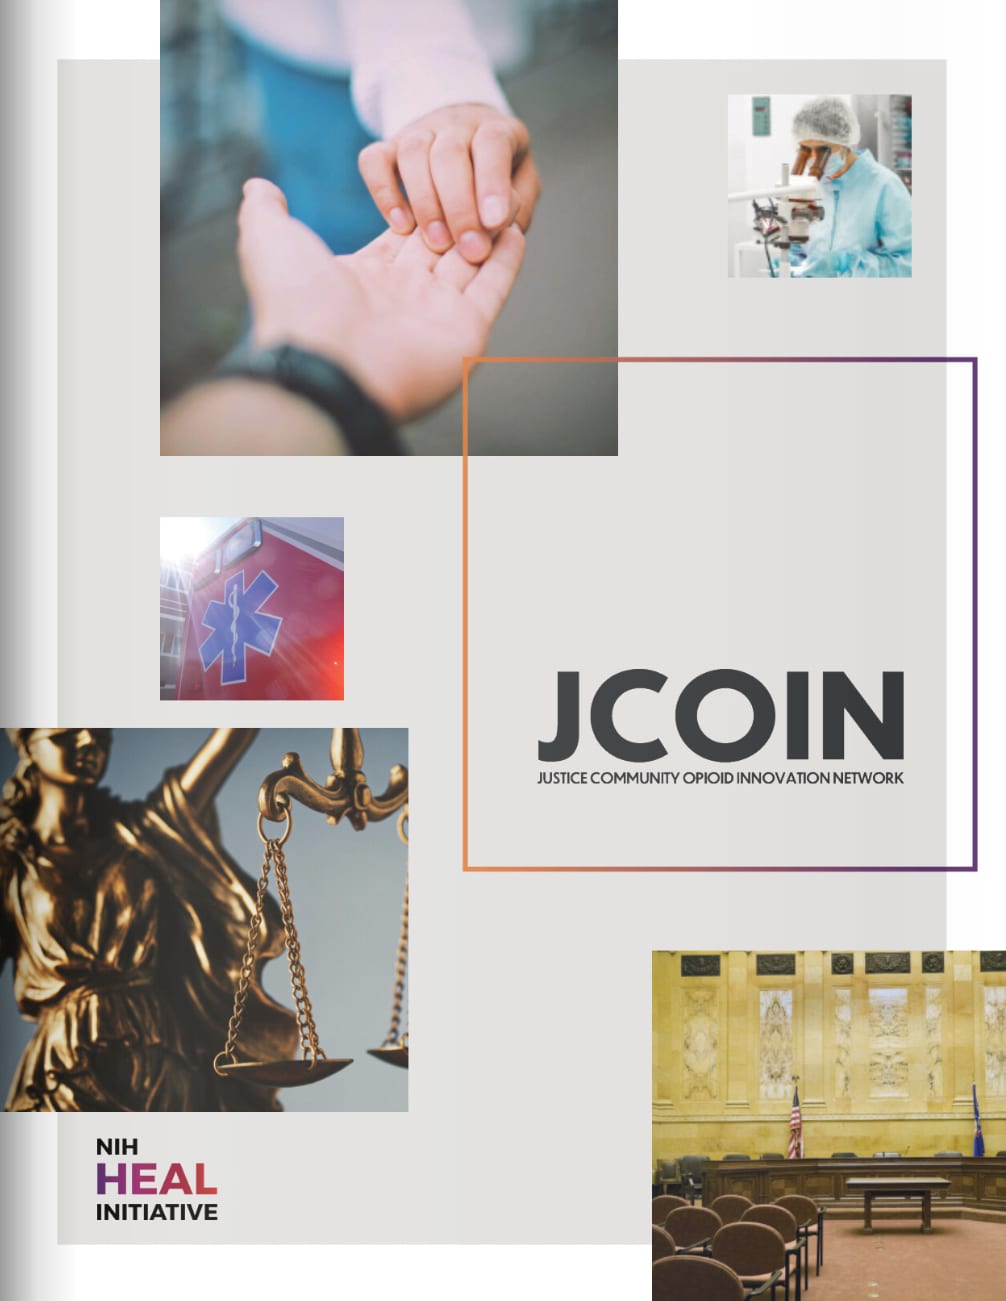 Preview cover of JCOIN Research book with images of a helping hand, a scientist, an ambulance, equality, and a courtroom.